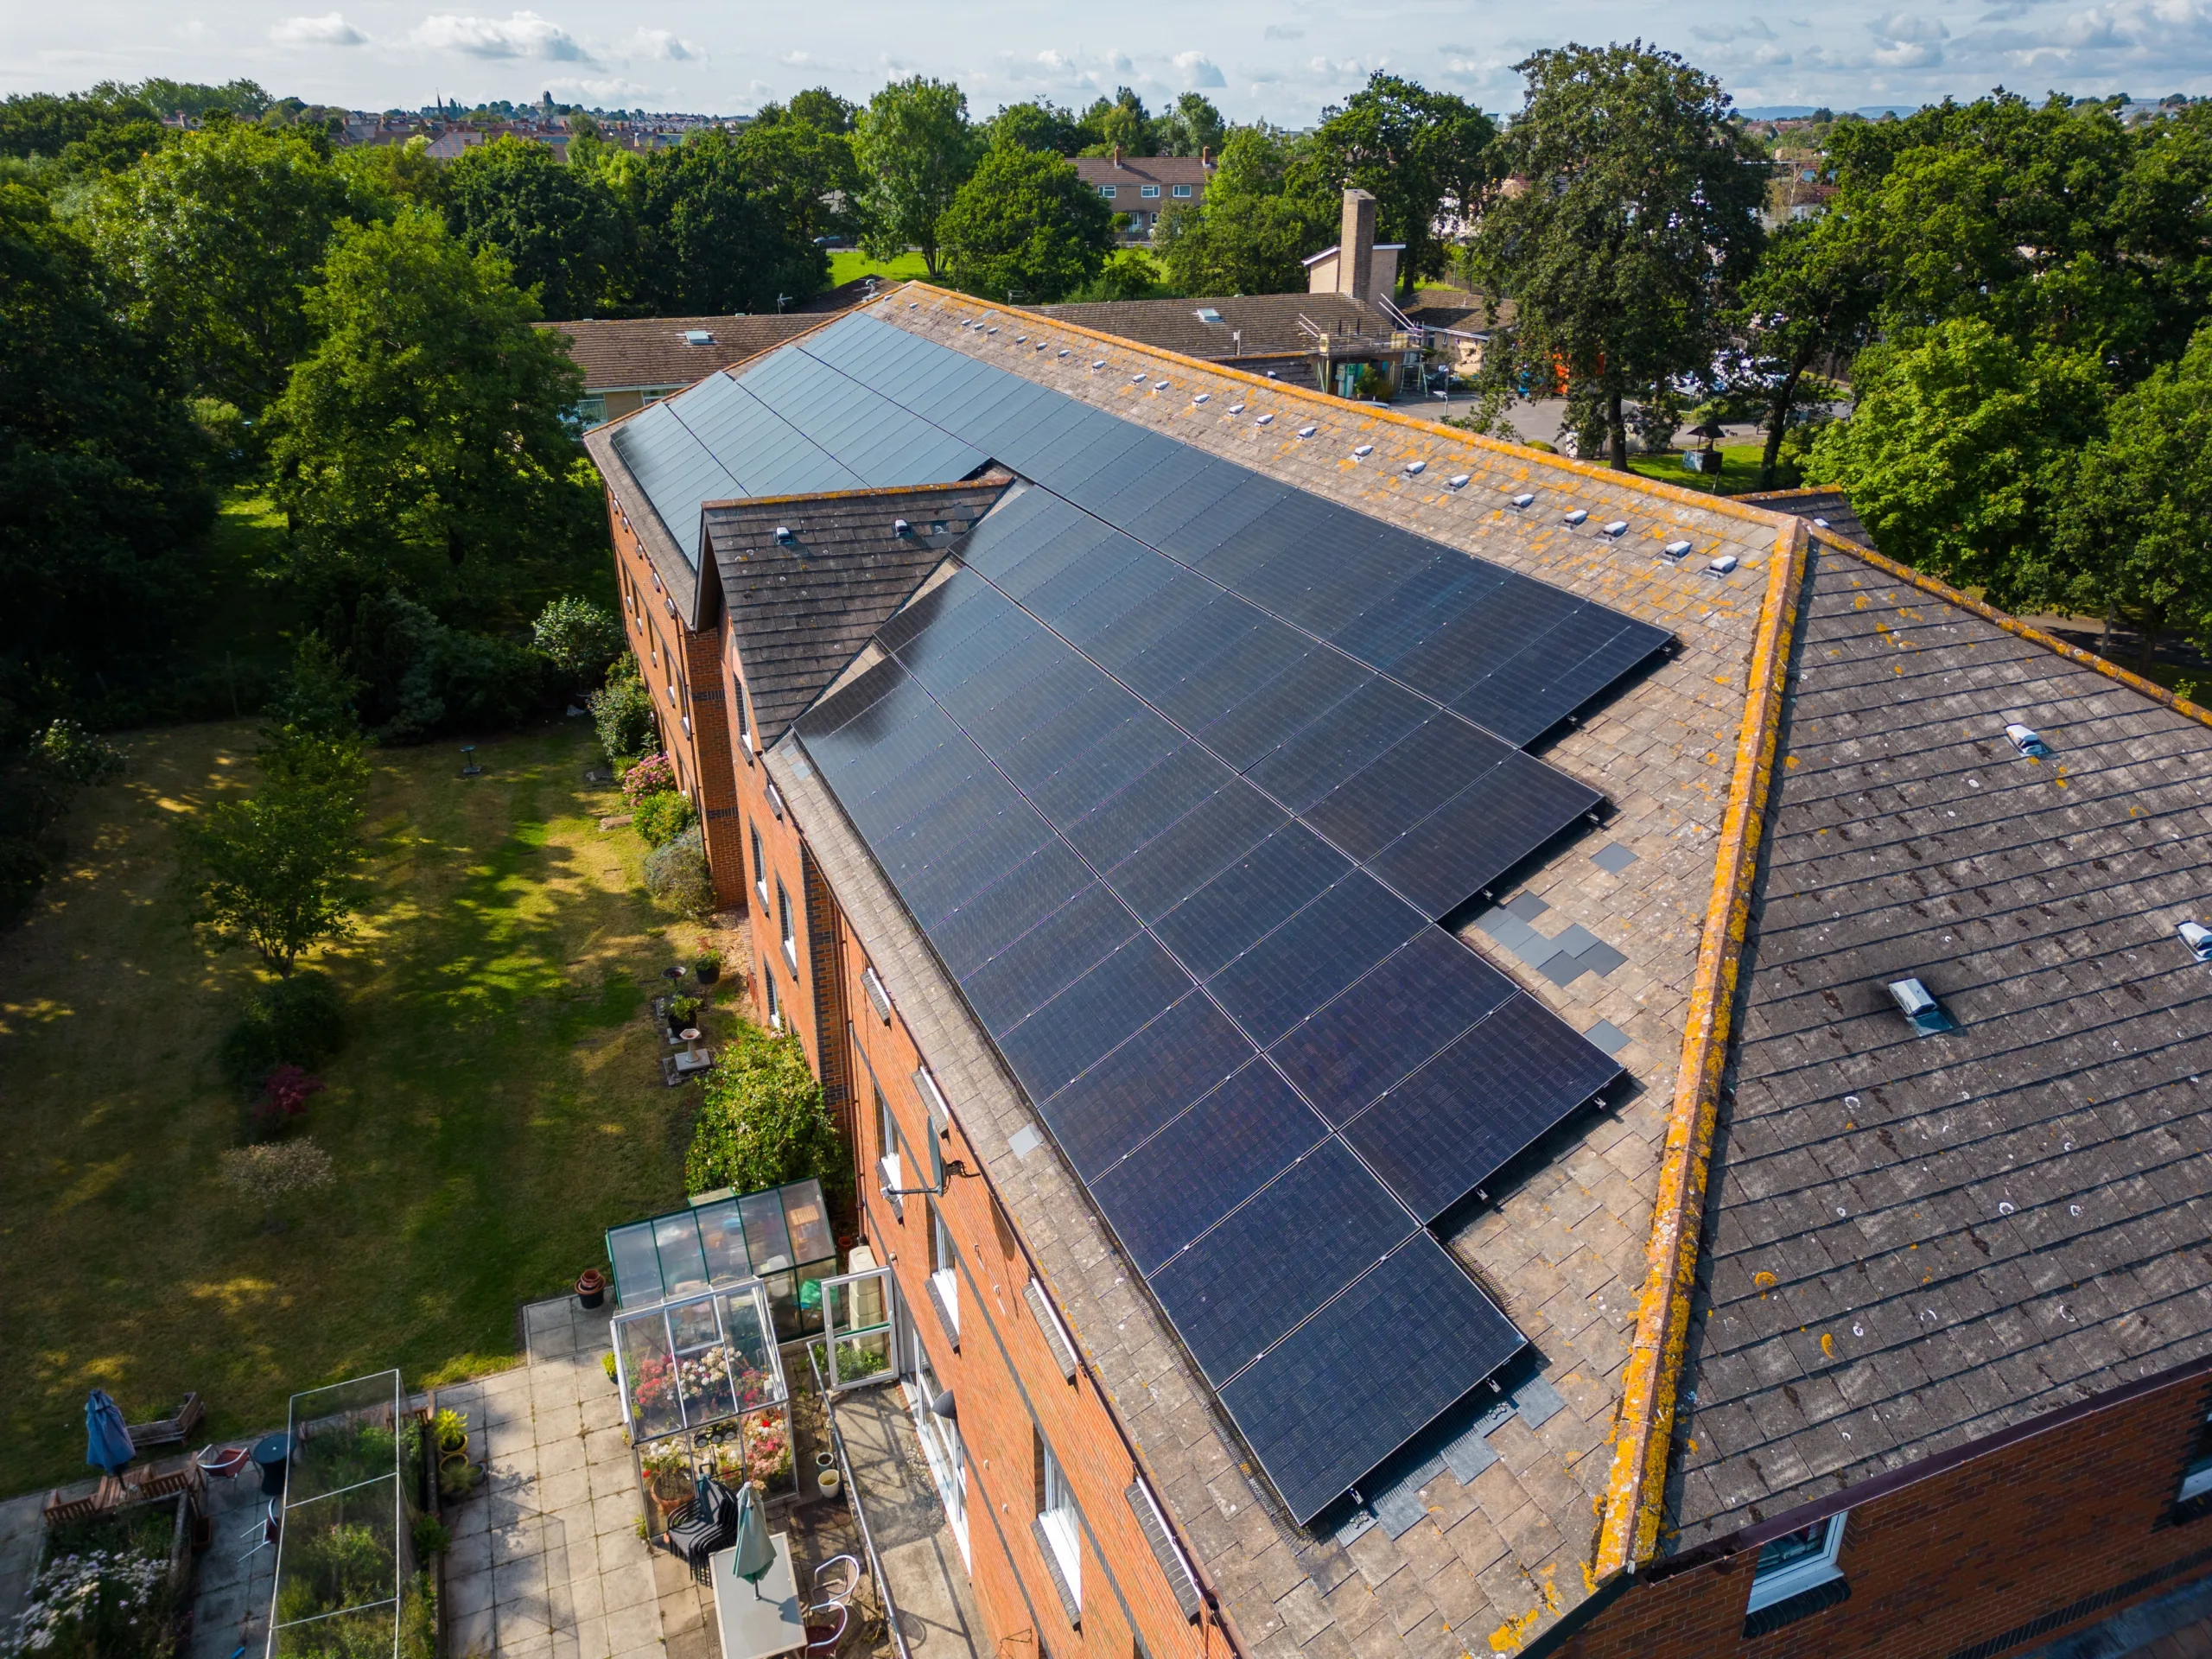 Solar panels on the roof of Oak Court in Wales